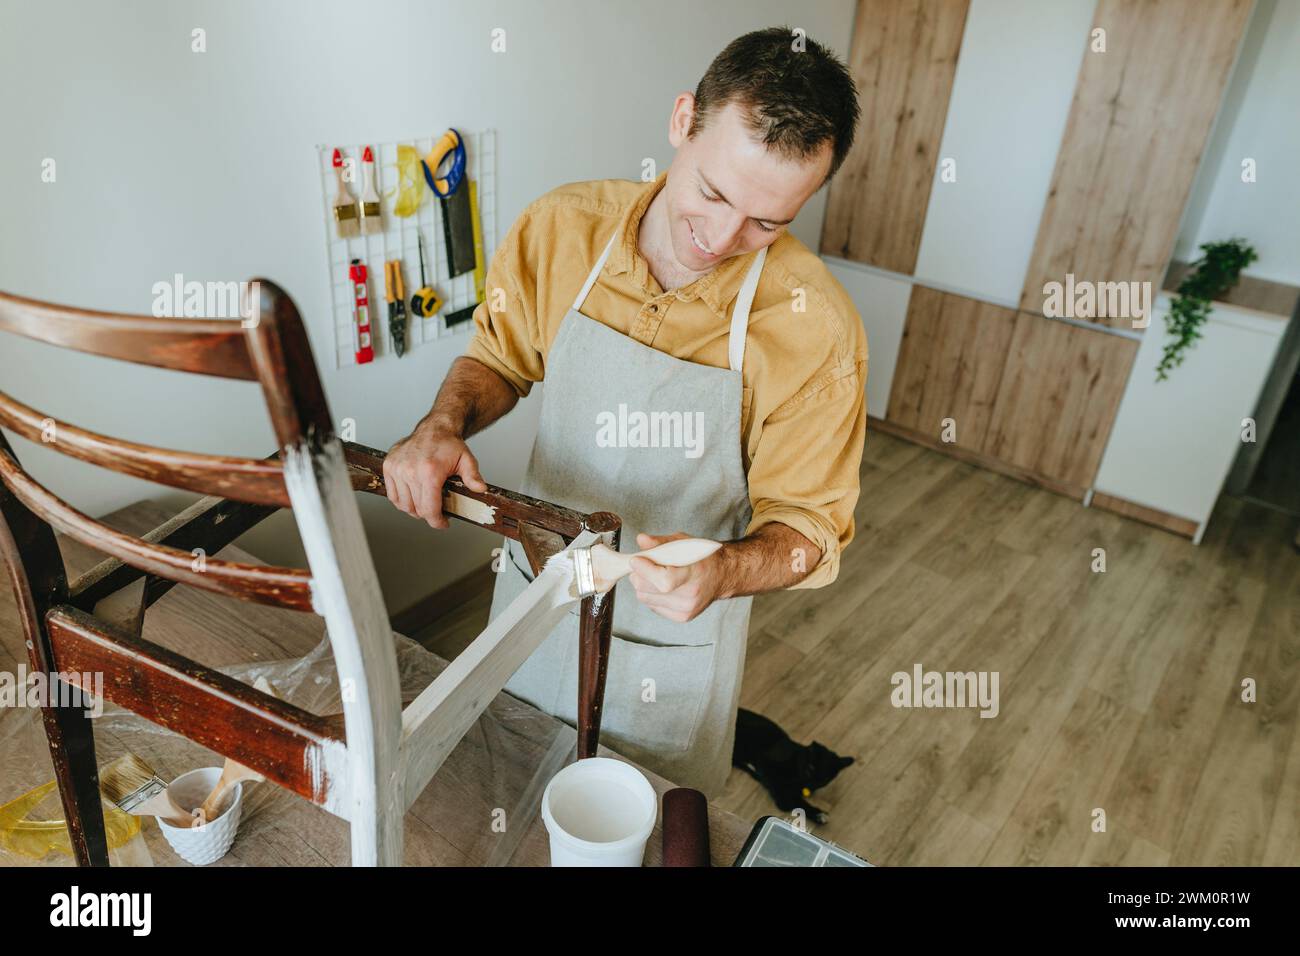 Smiling man painting chair with brush standing at home Stock Photo